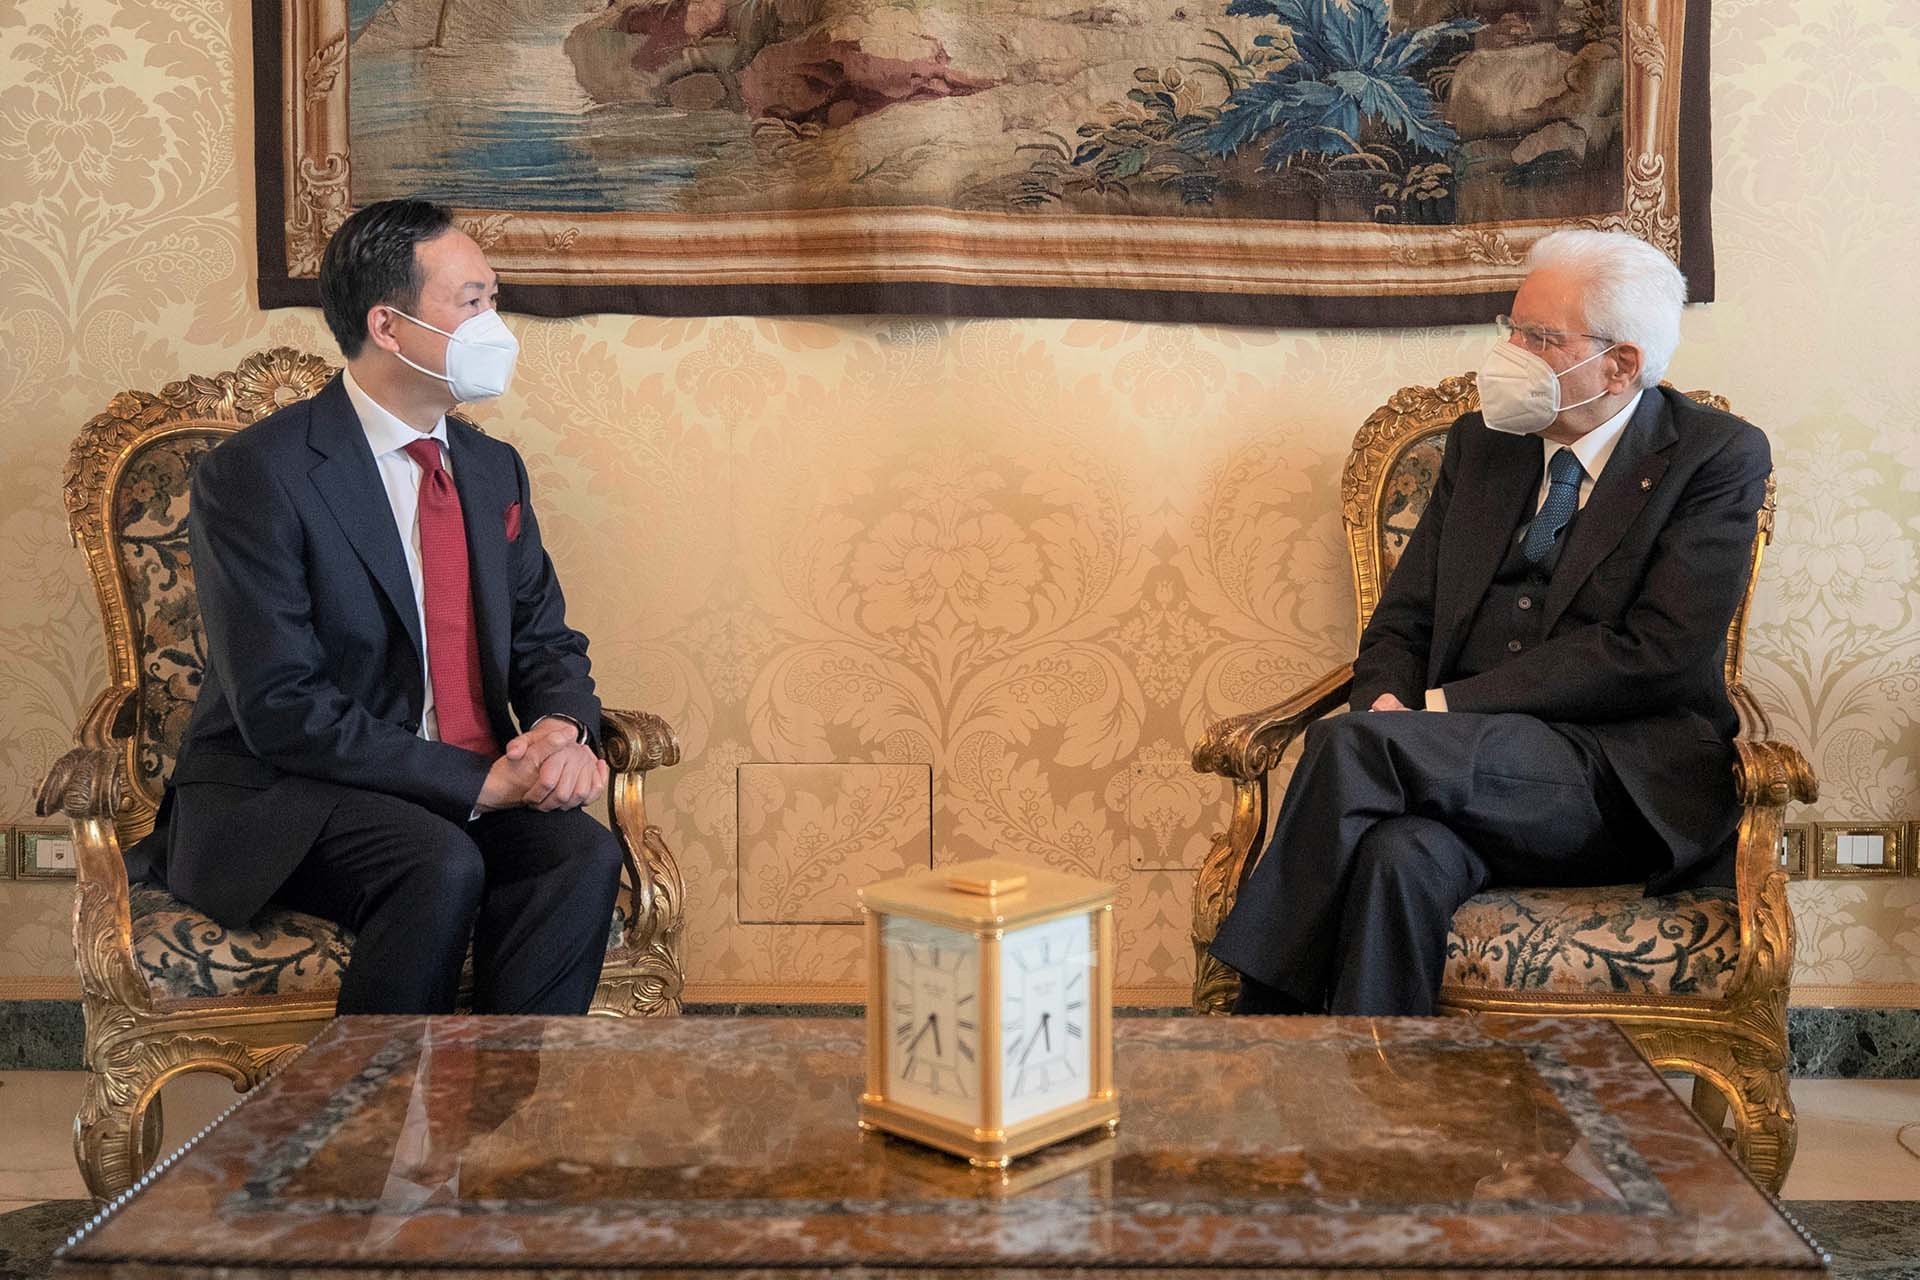 Italy attaches importance to relations with Viet Nam: President Mattarella